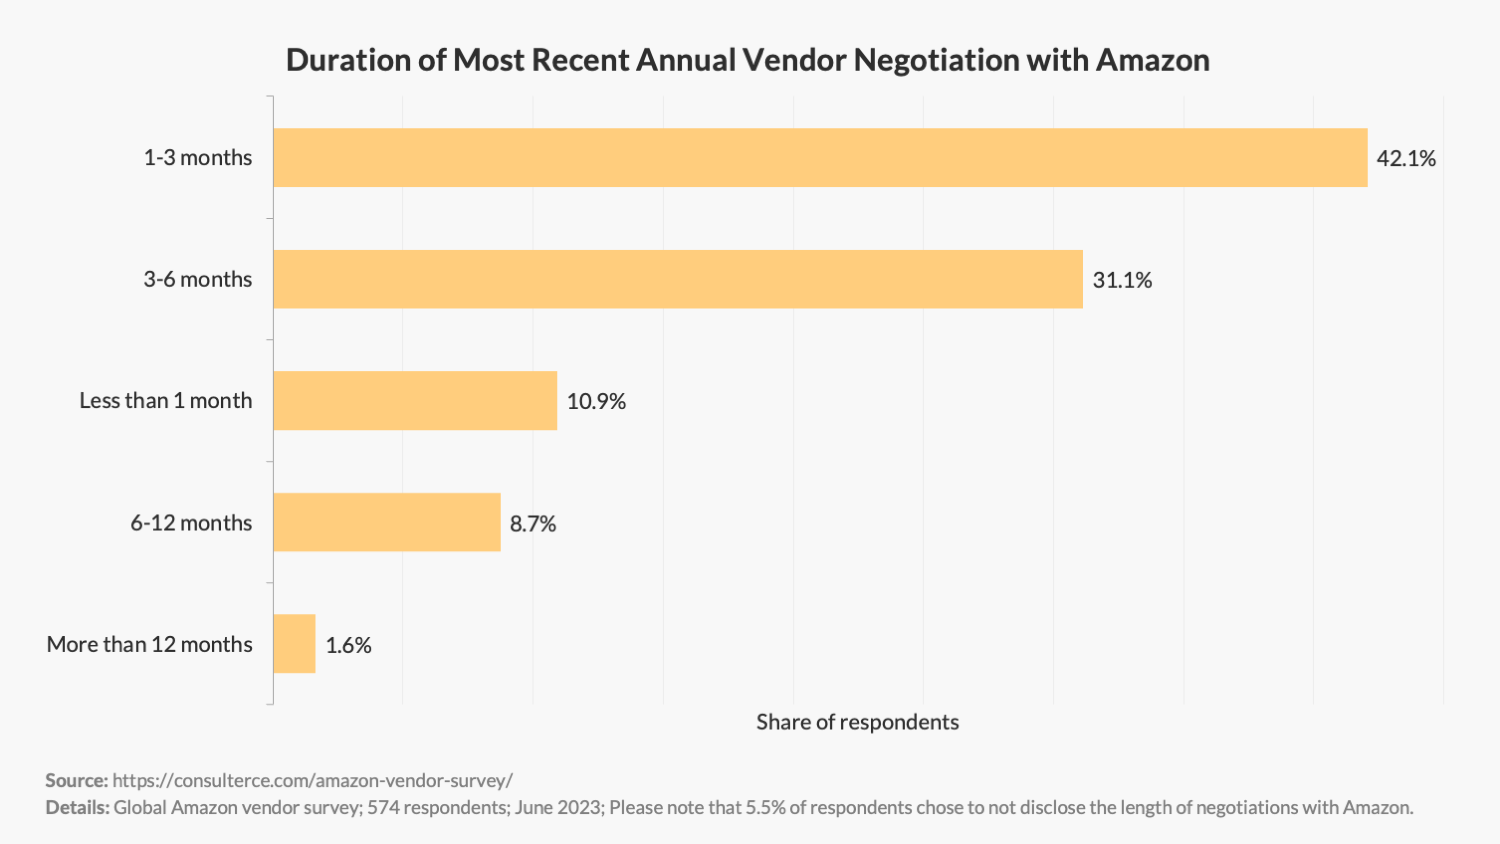 Duration of Most Recent Annual Vendor Negotiation with Amazon